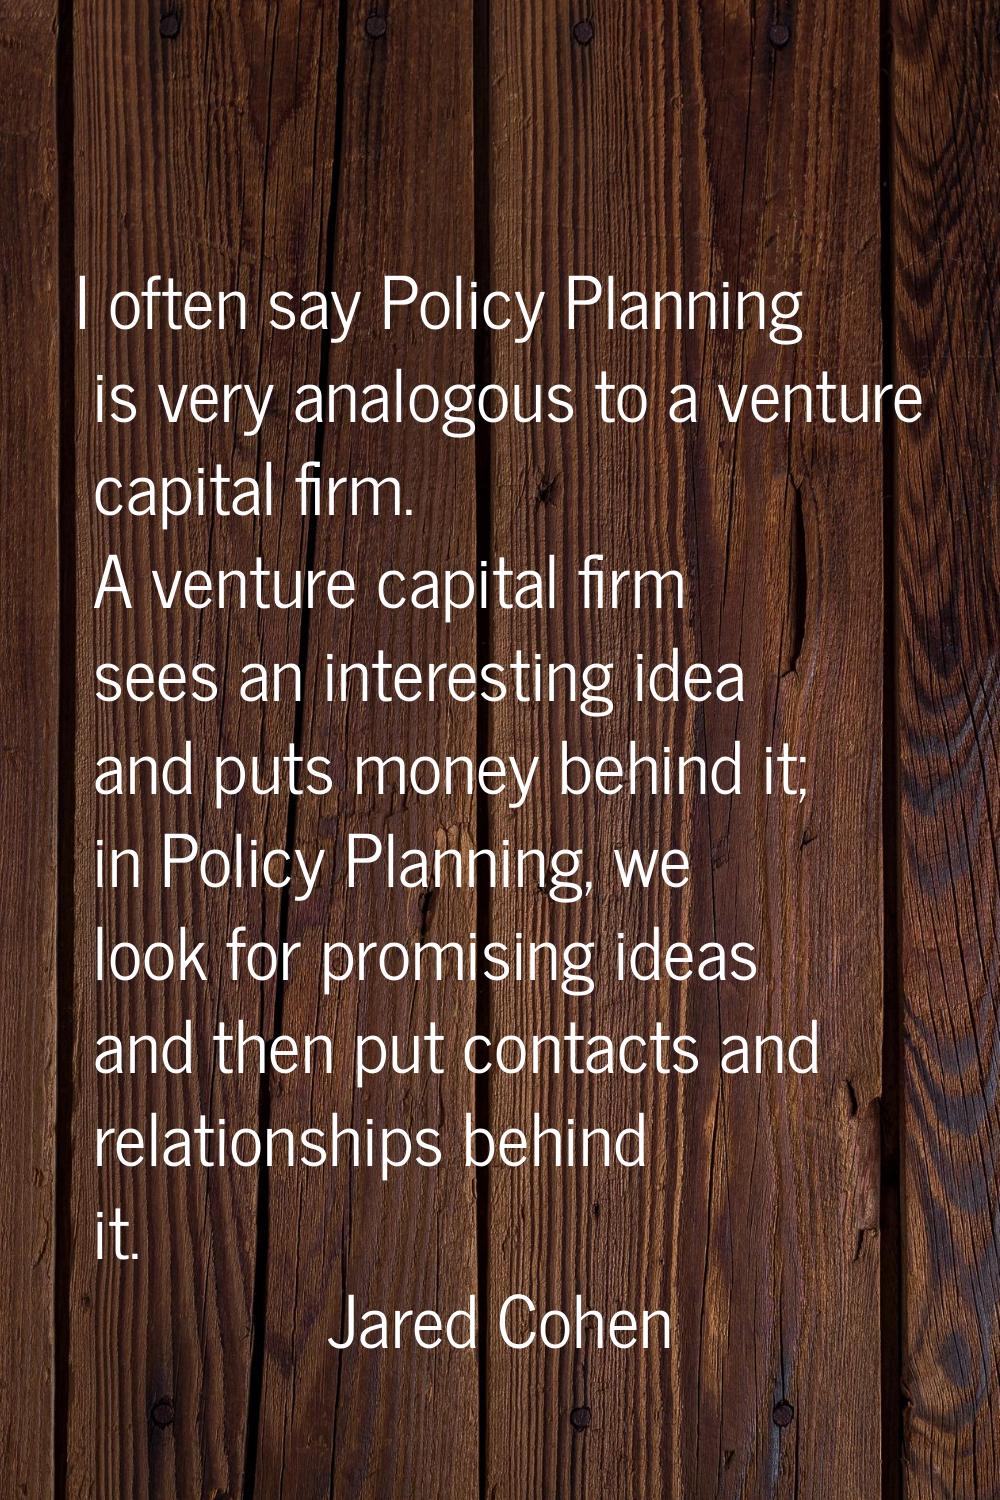 I often say Policy Planning is very analogous to a venture capital firm. A venture capital firm see